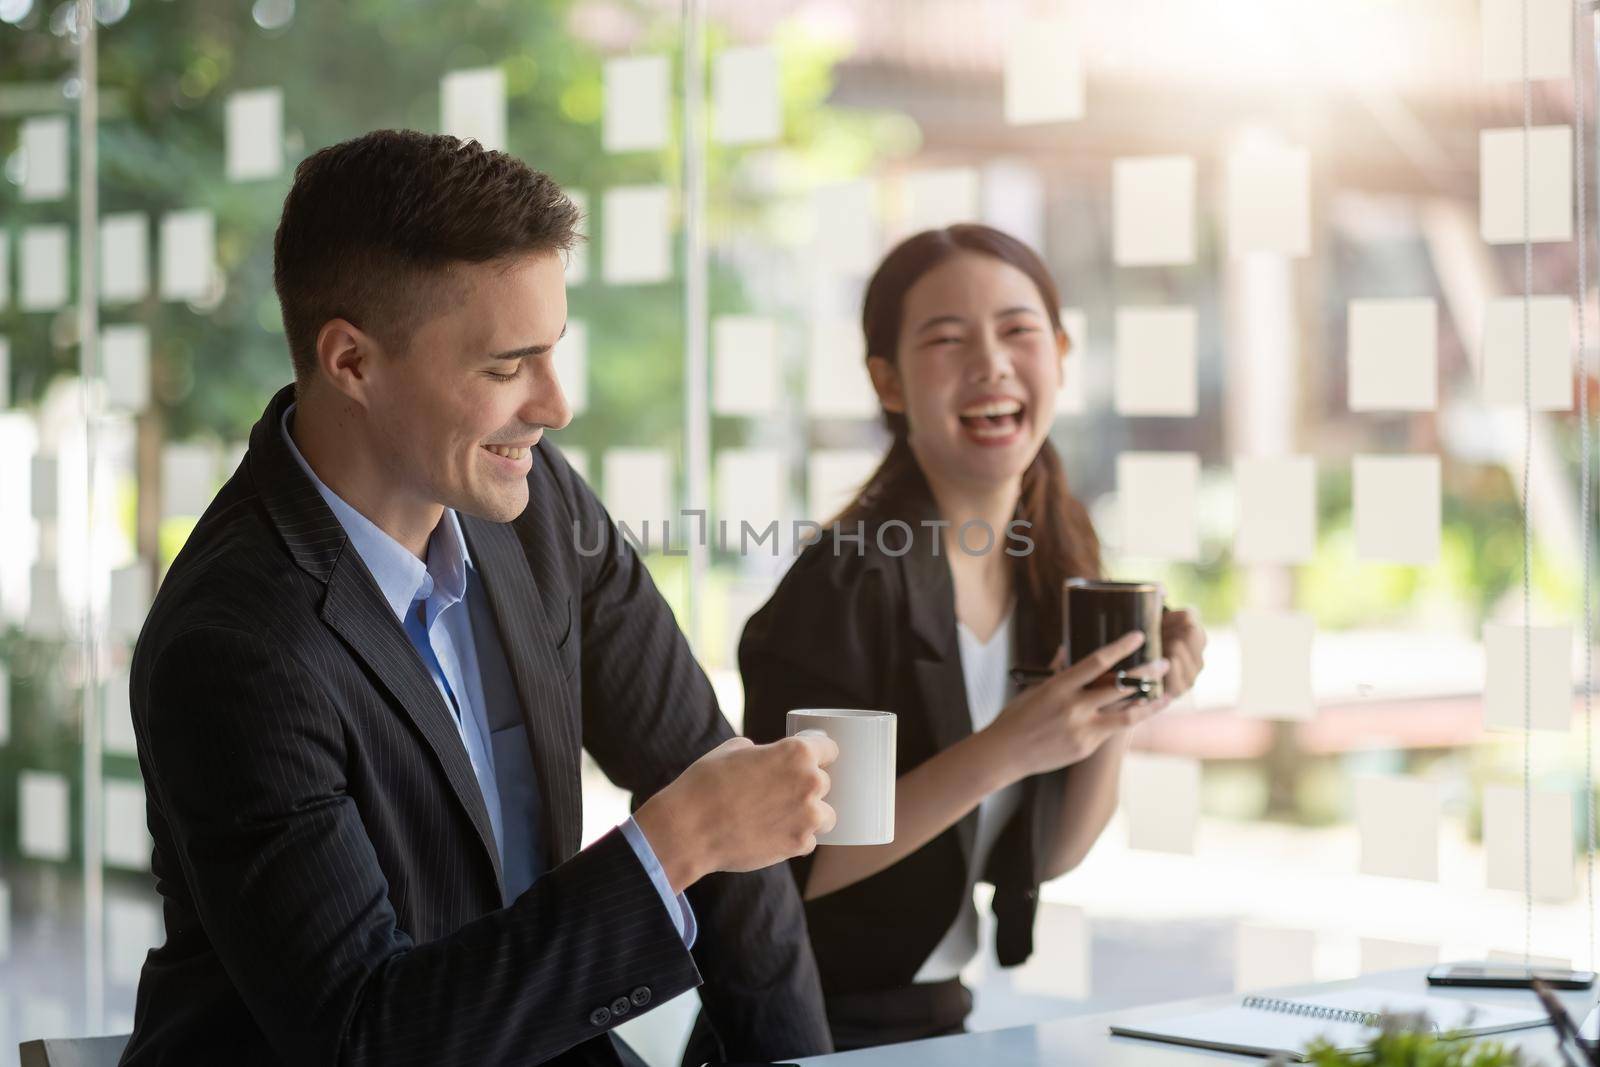 Friendly male leader laughing at group business meeting, happy young businesswoman enjoying fun conversation with partner, smiling business coach executive talking to colleague.